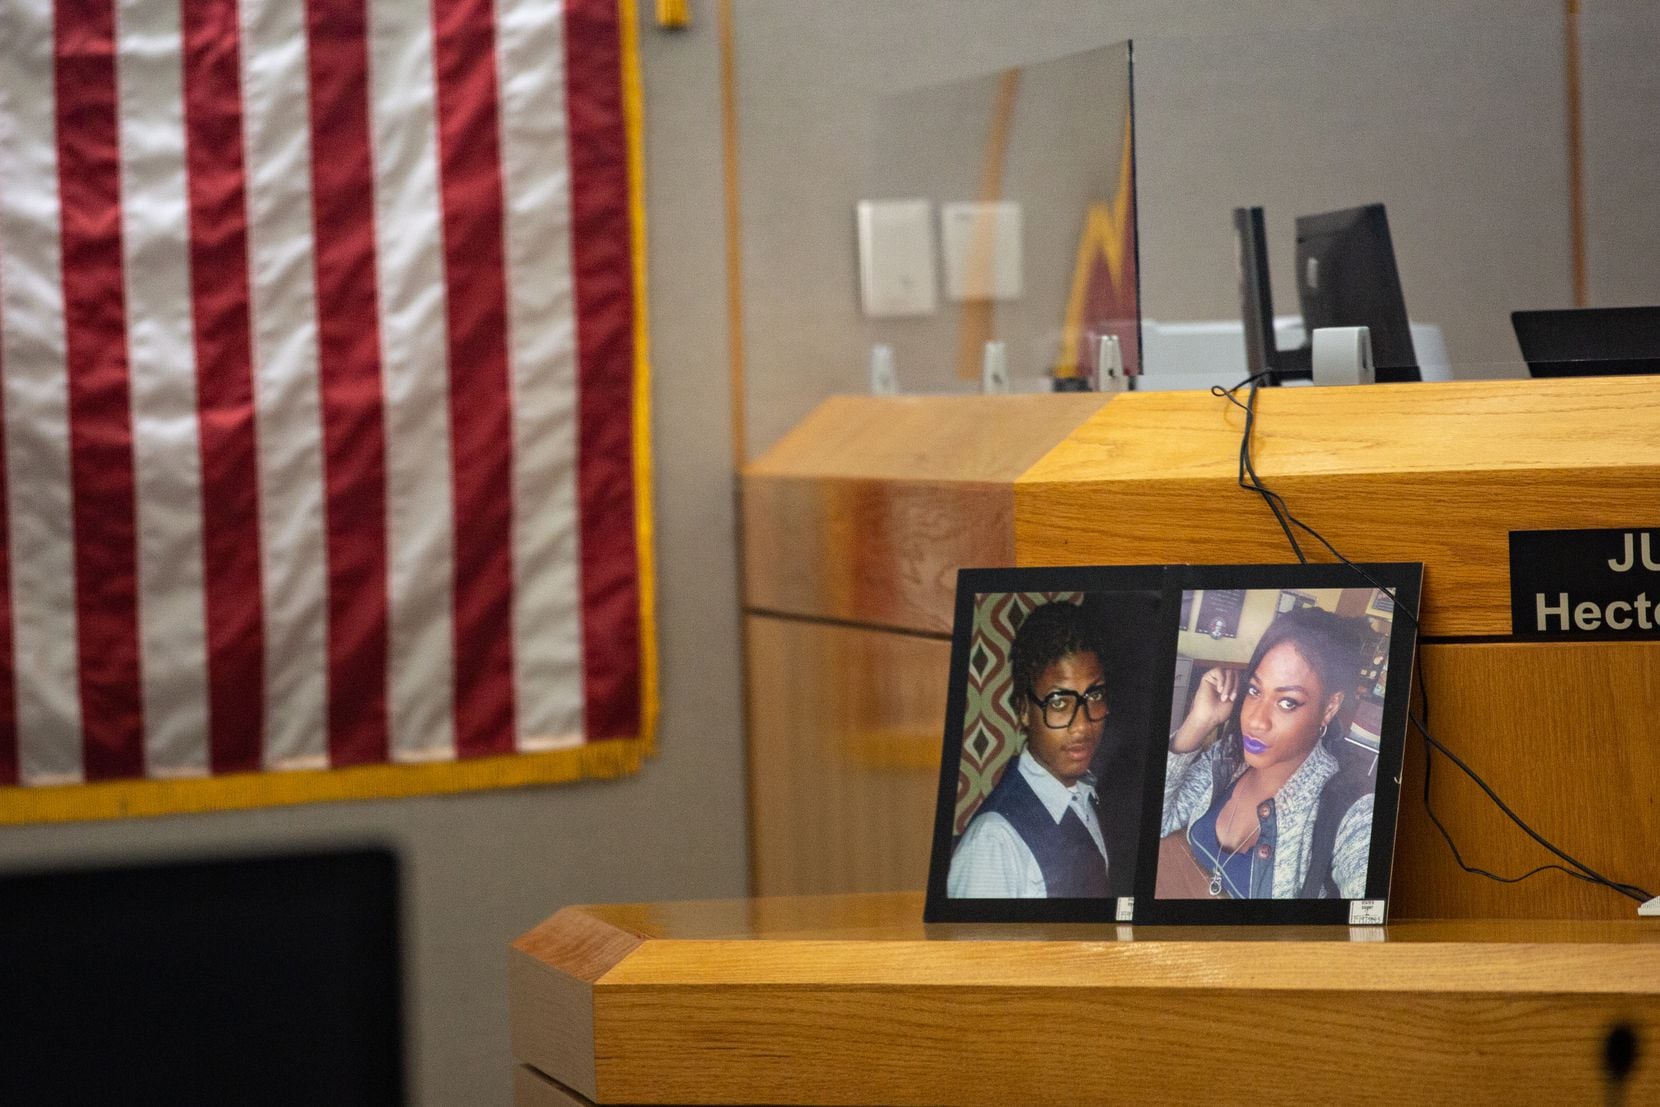 Photos of Chynal Lindsey sit on the judges stand during Ruben Alvarado’s trial for the murder of Lindsey at the Frank Crowley Criminal Courts in Dallas, TX on November 8, 2021. Lindsey, a transgender woman, was found dead in White Rock Lake on June 1, 2019. (Shelby Tauber/Special Contributor)